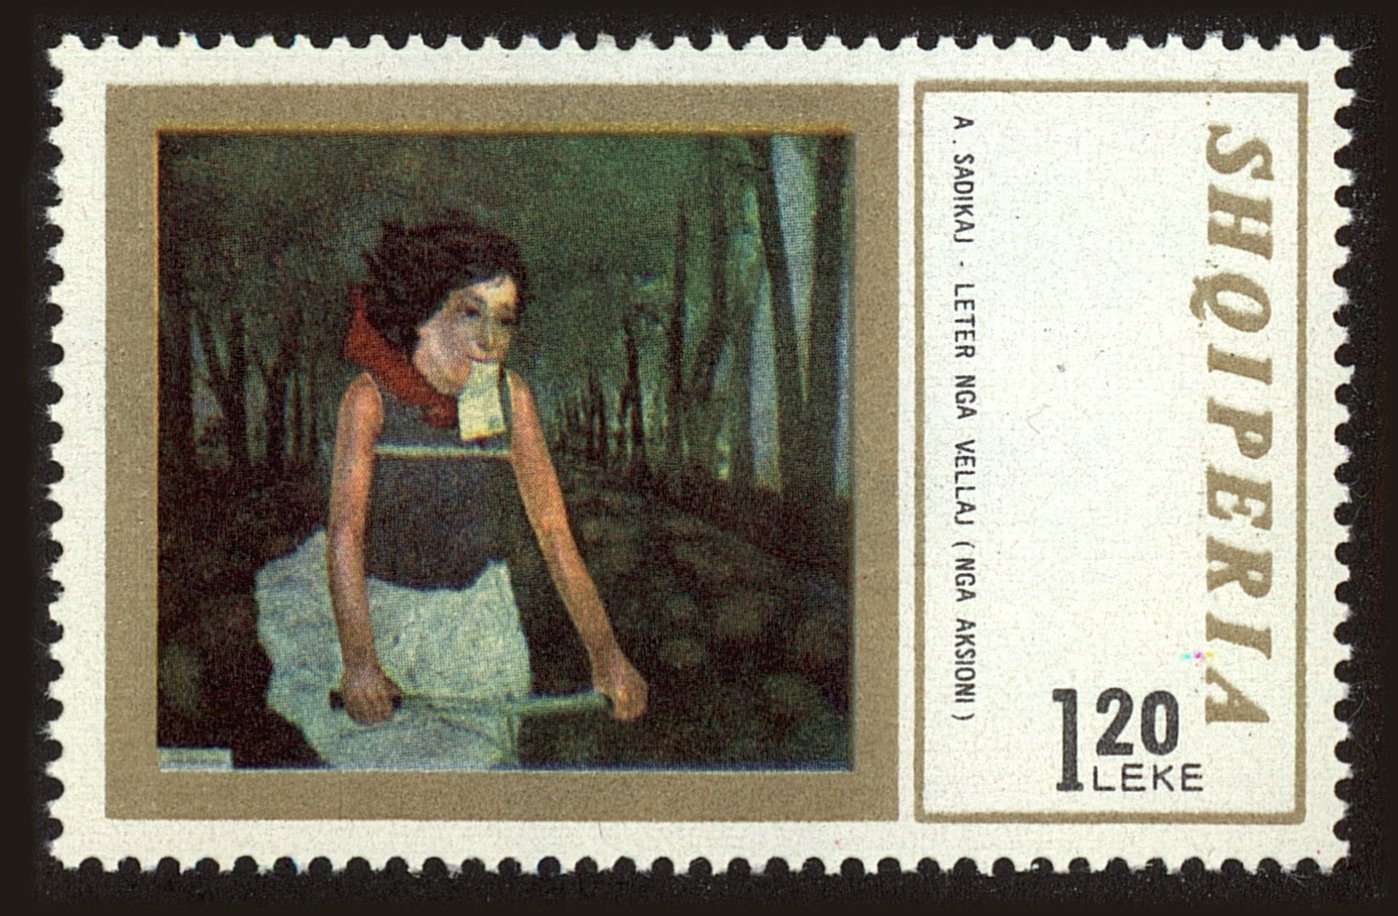 Front view of Albania 1392 collectors stamp